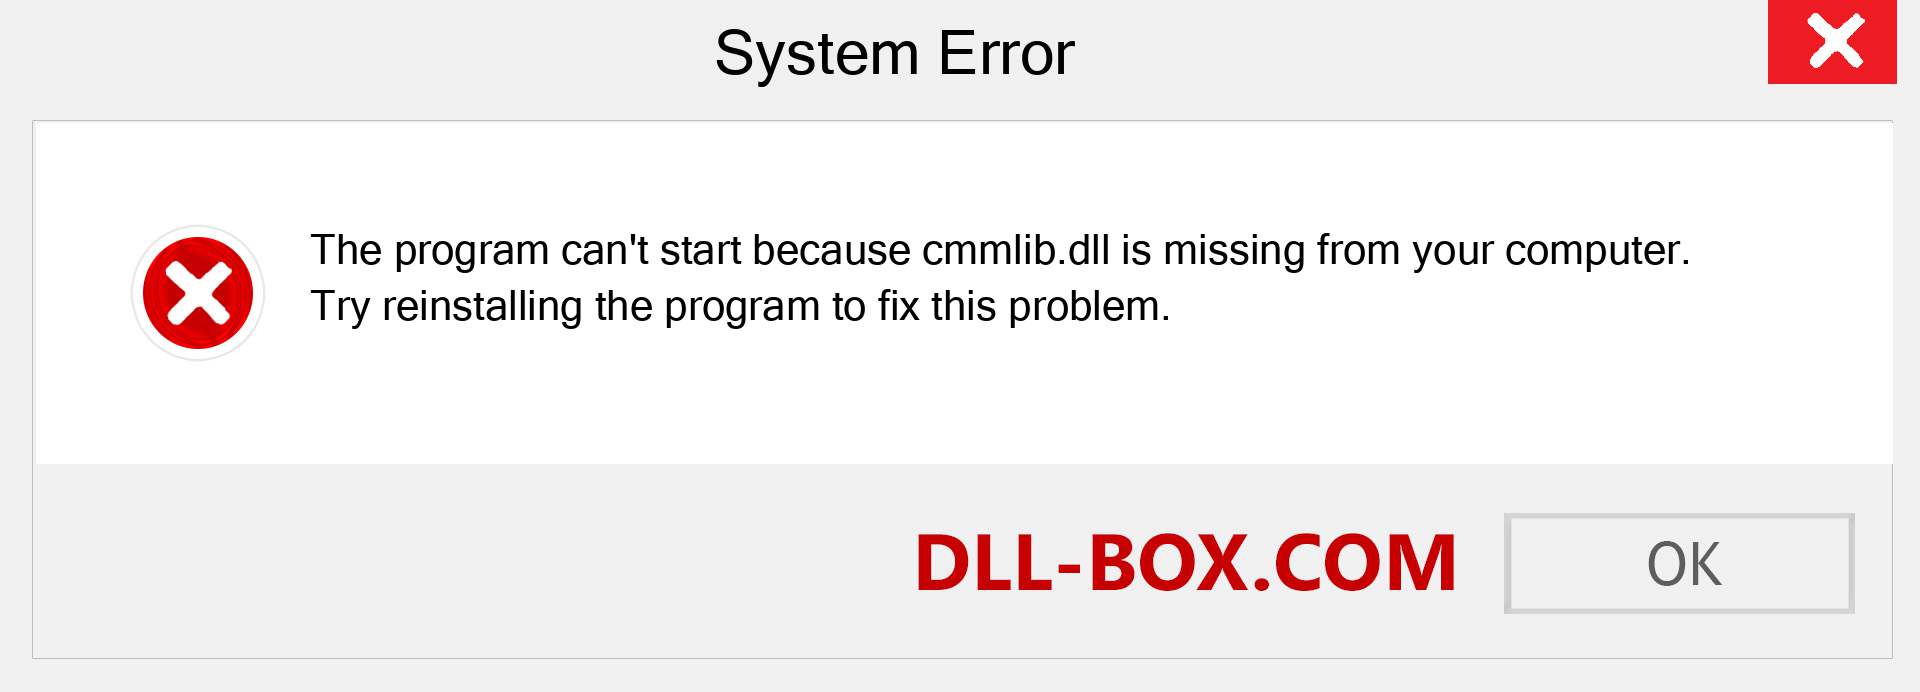  cmmlib.dll file is missing?. Download for Windows 7, 8, 10 - Fix  cmmlib dll Missing Error on Windows, photos, images